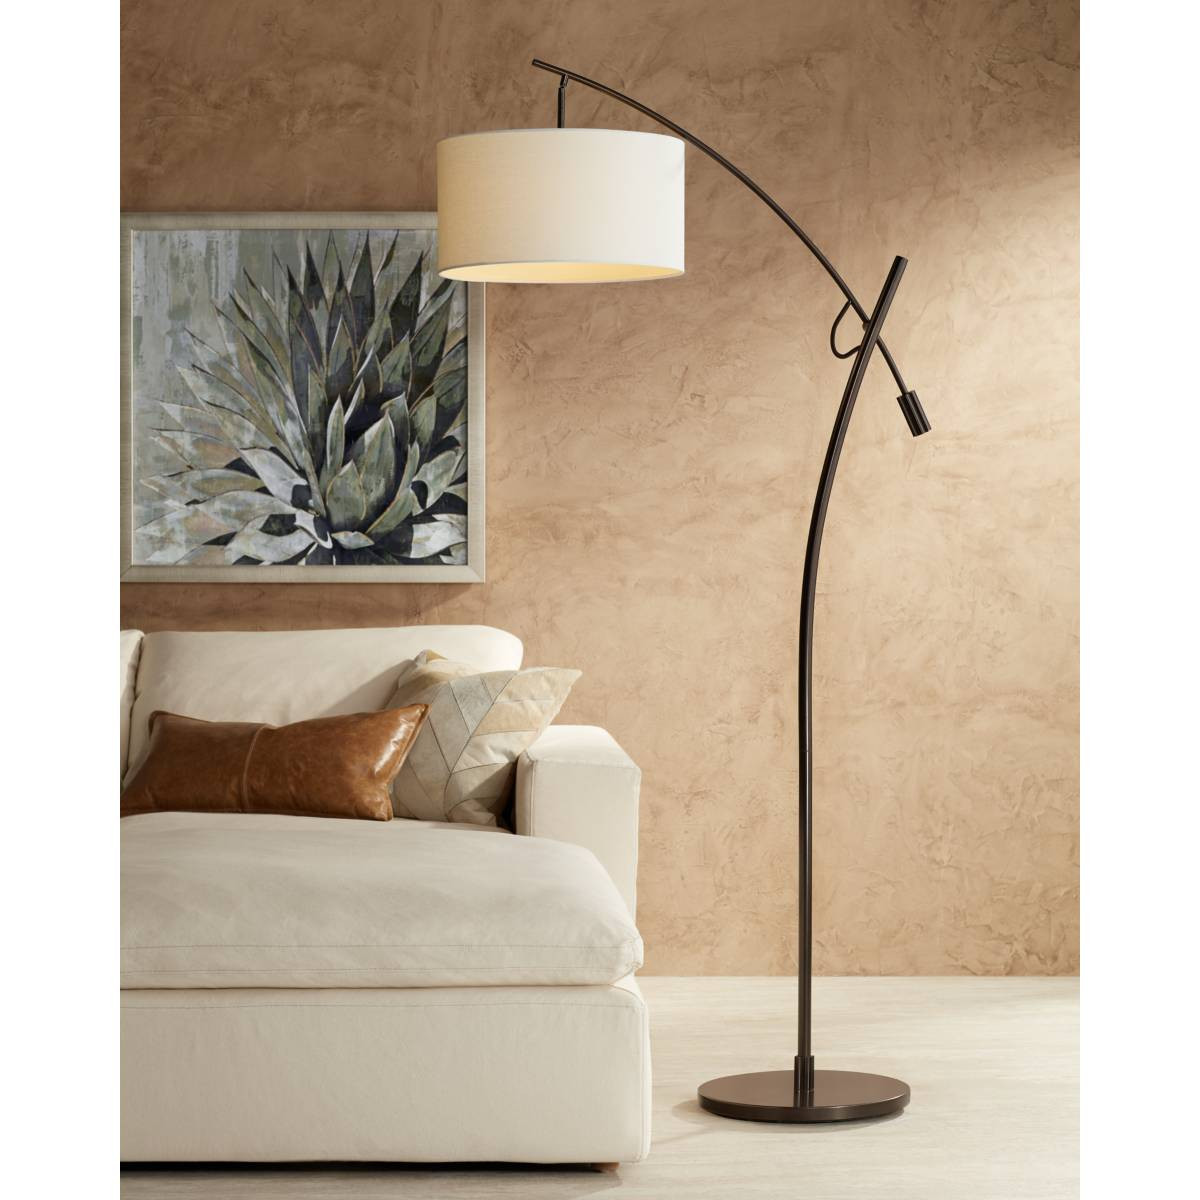 24 Awesome Living Room Arc Floor Lamps Home, Family, Style and Art Ideas